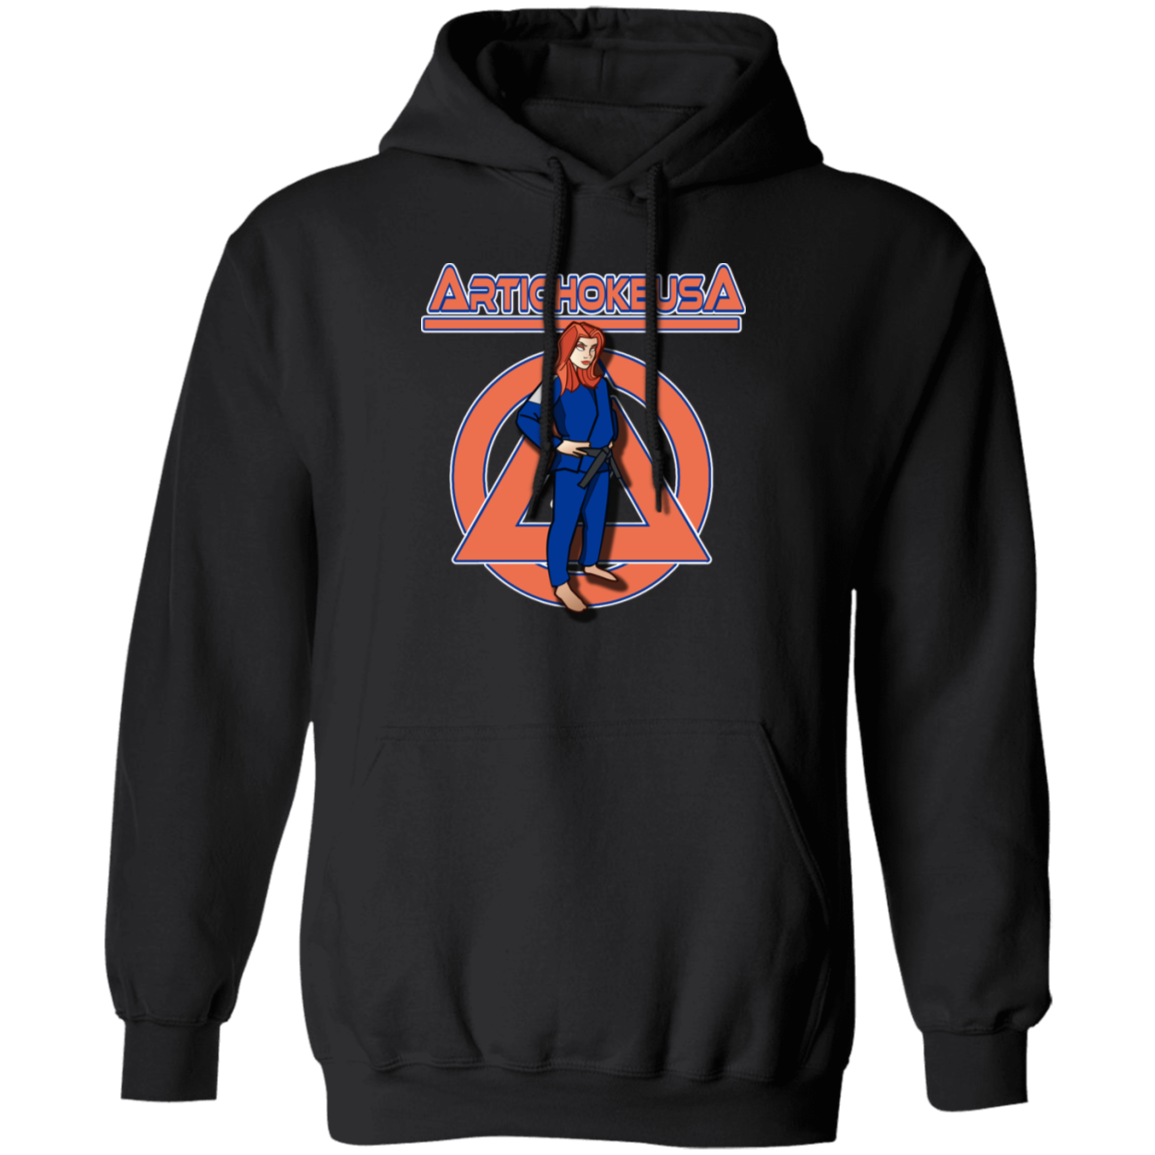 ArtichokeUSA Character and Font design. Let's Create Your Own Team Design Today. Amber. Basic Pullover Hoodie